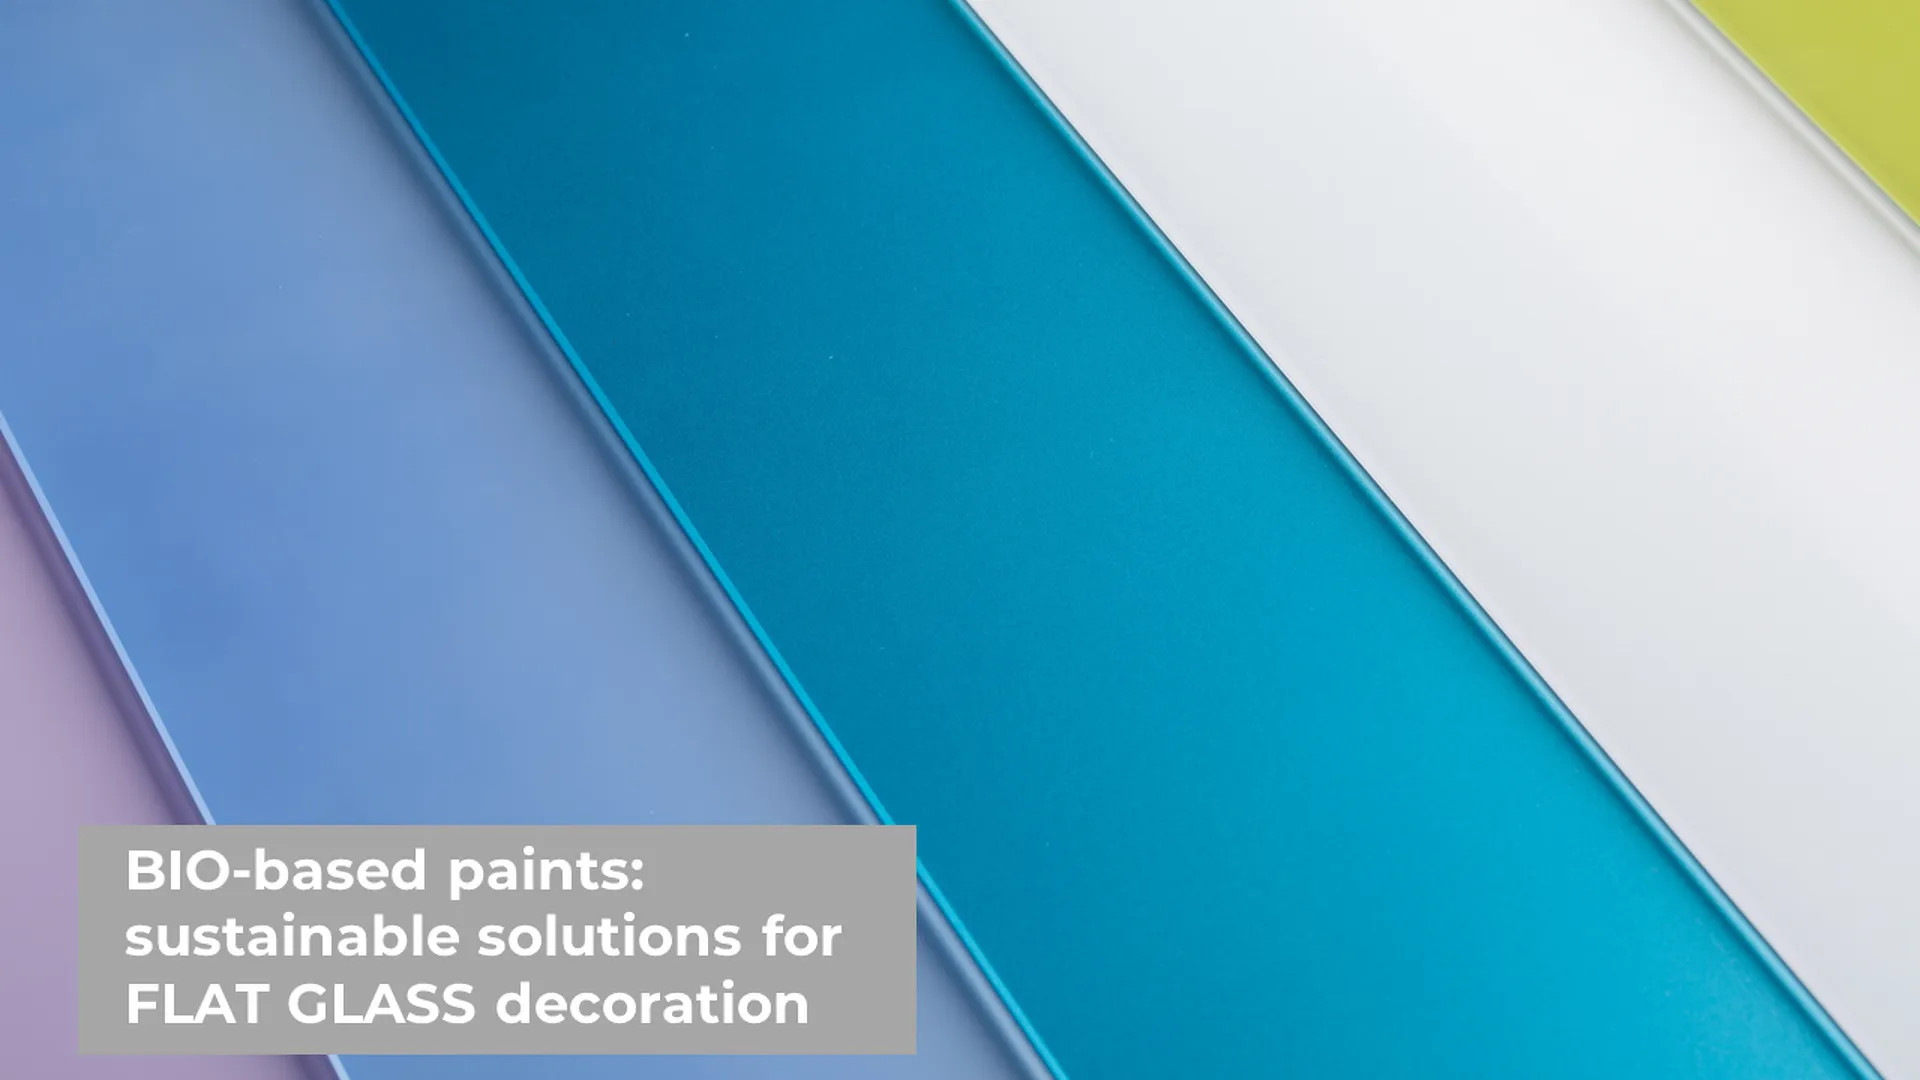 BIO BASED PAINTS: sustainable solutions for FLAT GLASS decoration